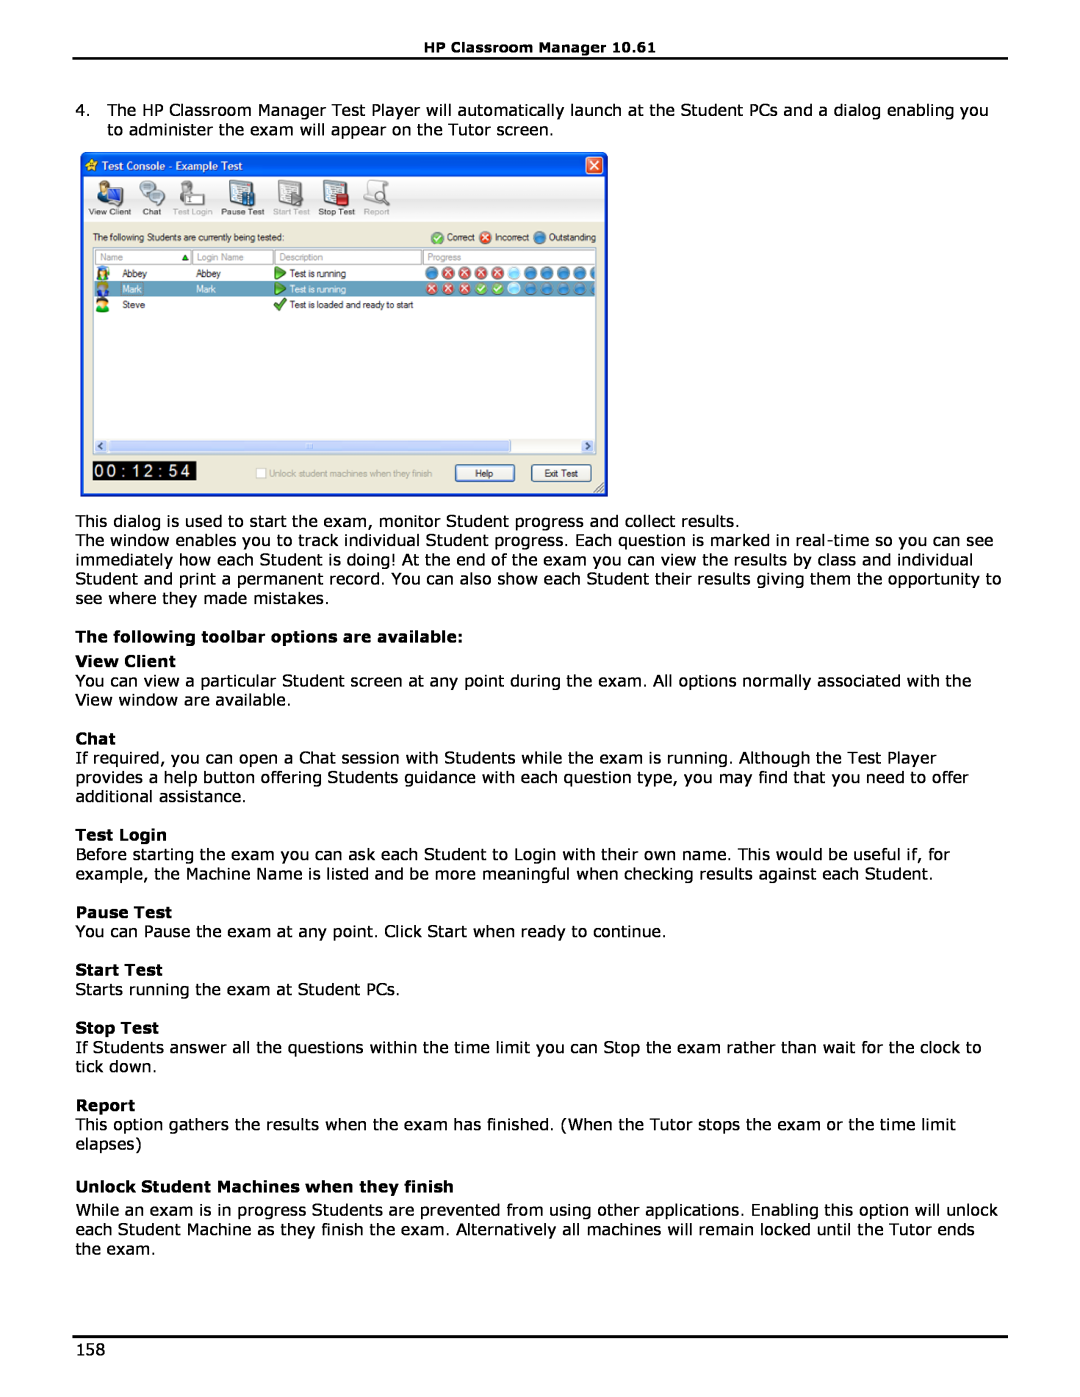 HP Classroom Manager The following toolbar options are available View Client, Test Login, Pause Test, Start Test, Report 